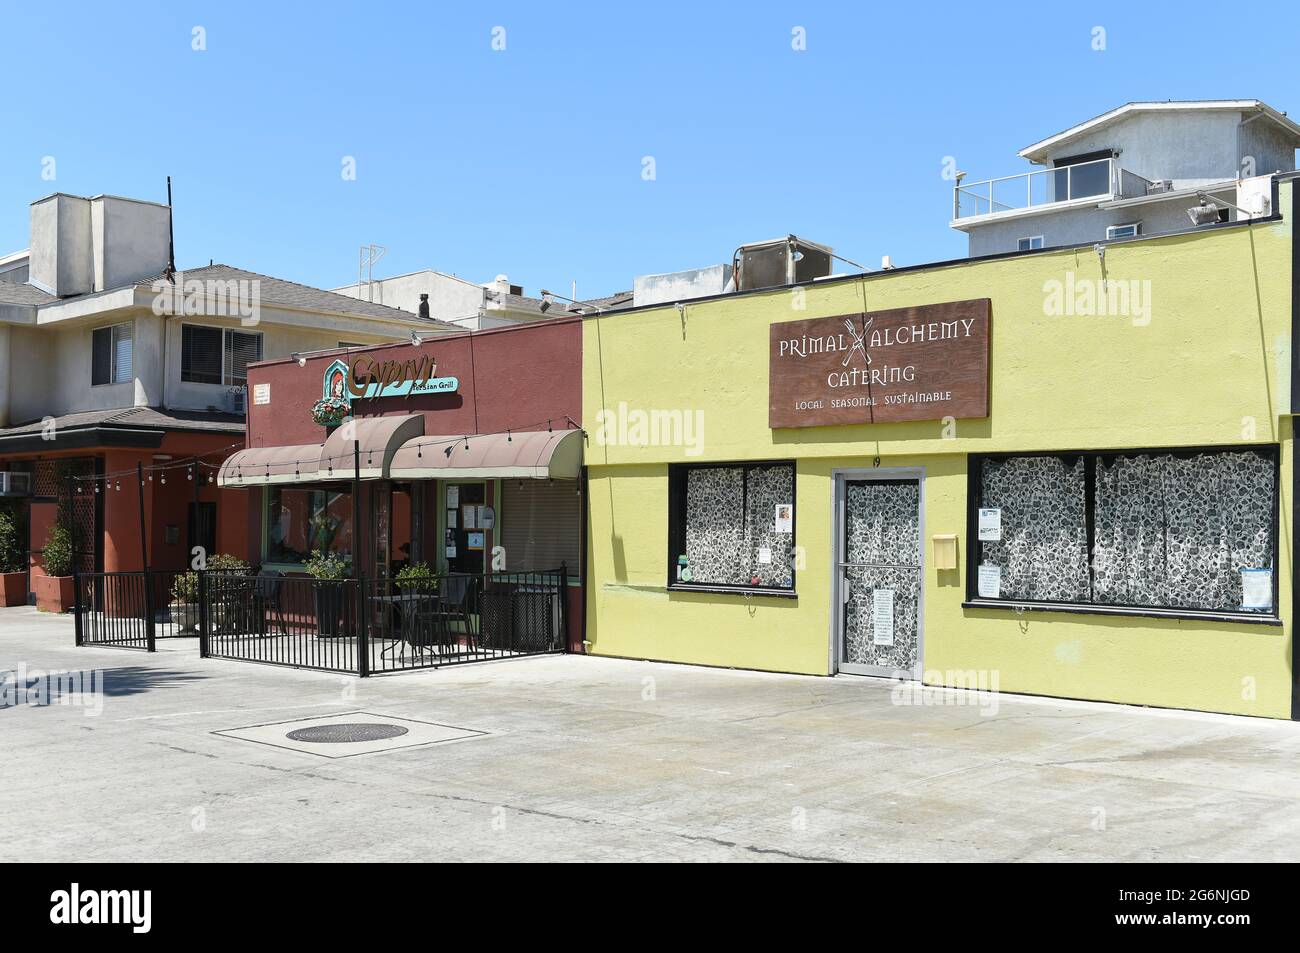 LONG BEACH, CALIFORNIA - 5 JULY 2021: The Cyprus Persian Grill and Primal Alchemy Catering restaurants in the Belmont Shores neighborhood. Stock Photo